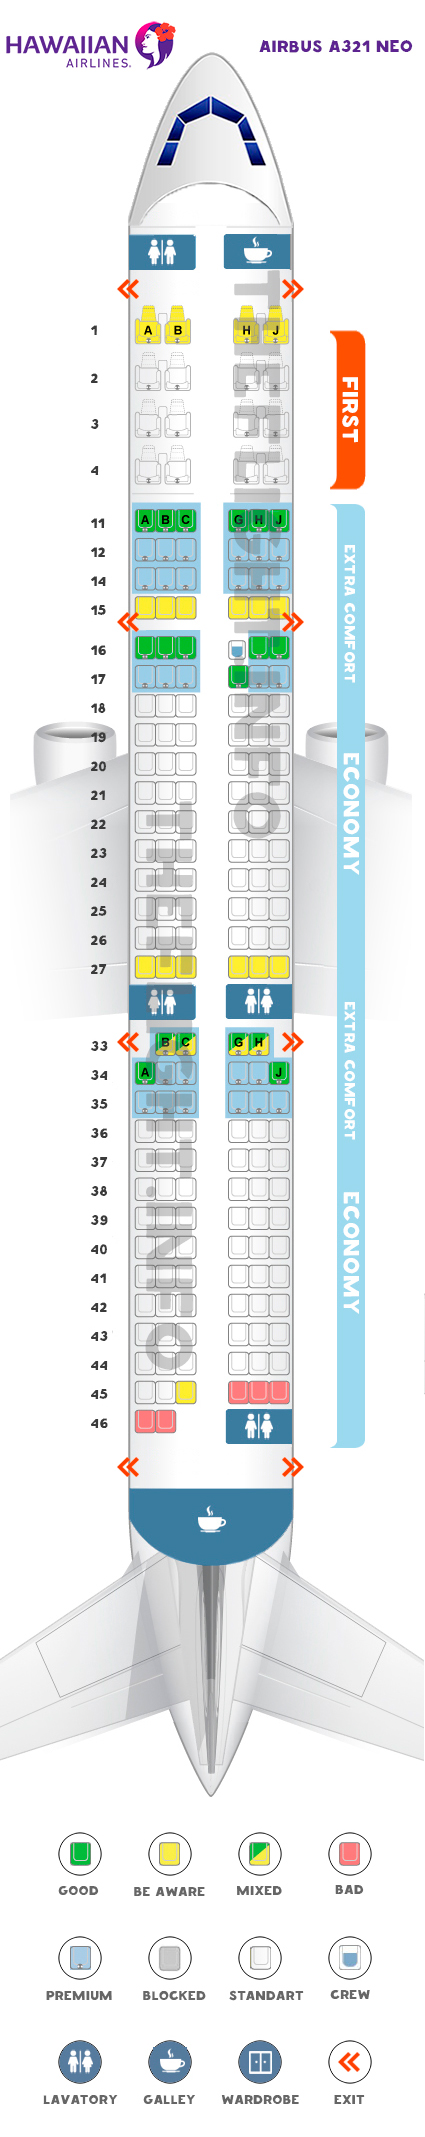 A321neo Seating Chart